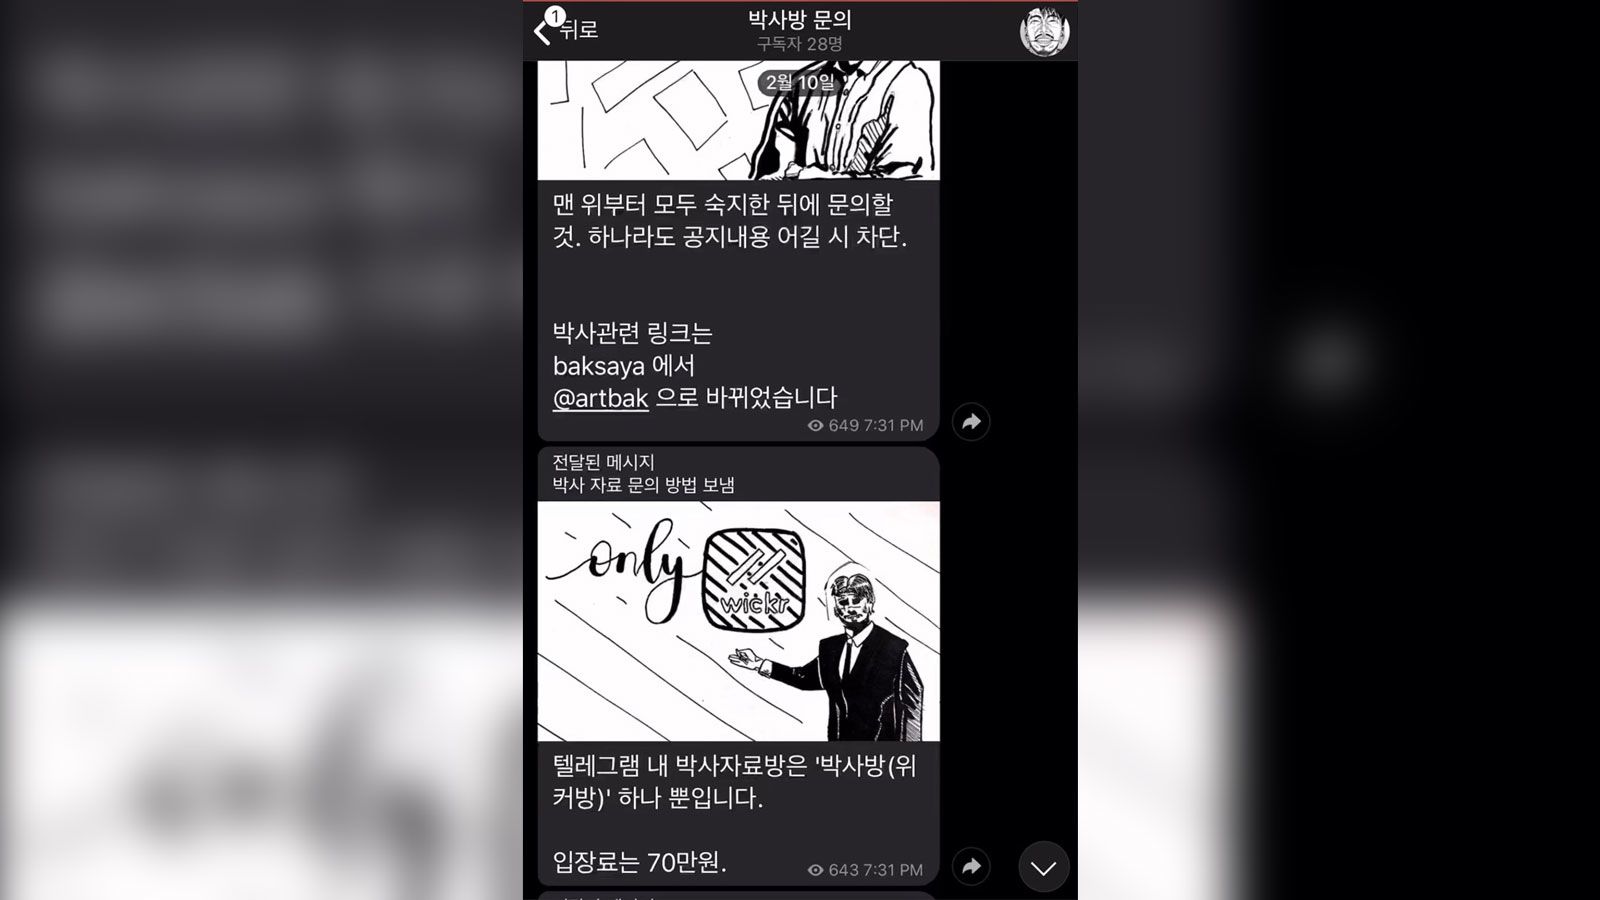 Sex Videos Massage Blackmail - Dozens of young women in South Korea were allegedly forced into sexual  slavery on an encrypted messaging app | CNN